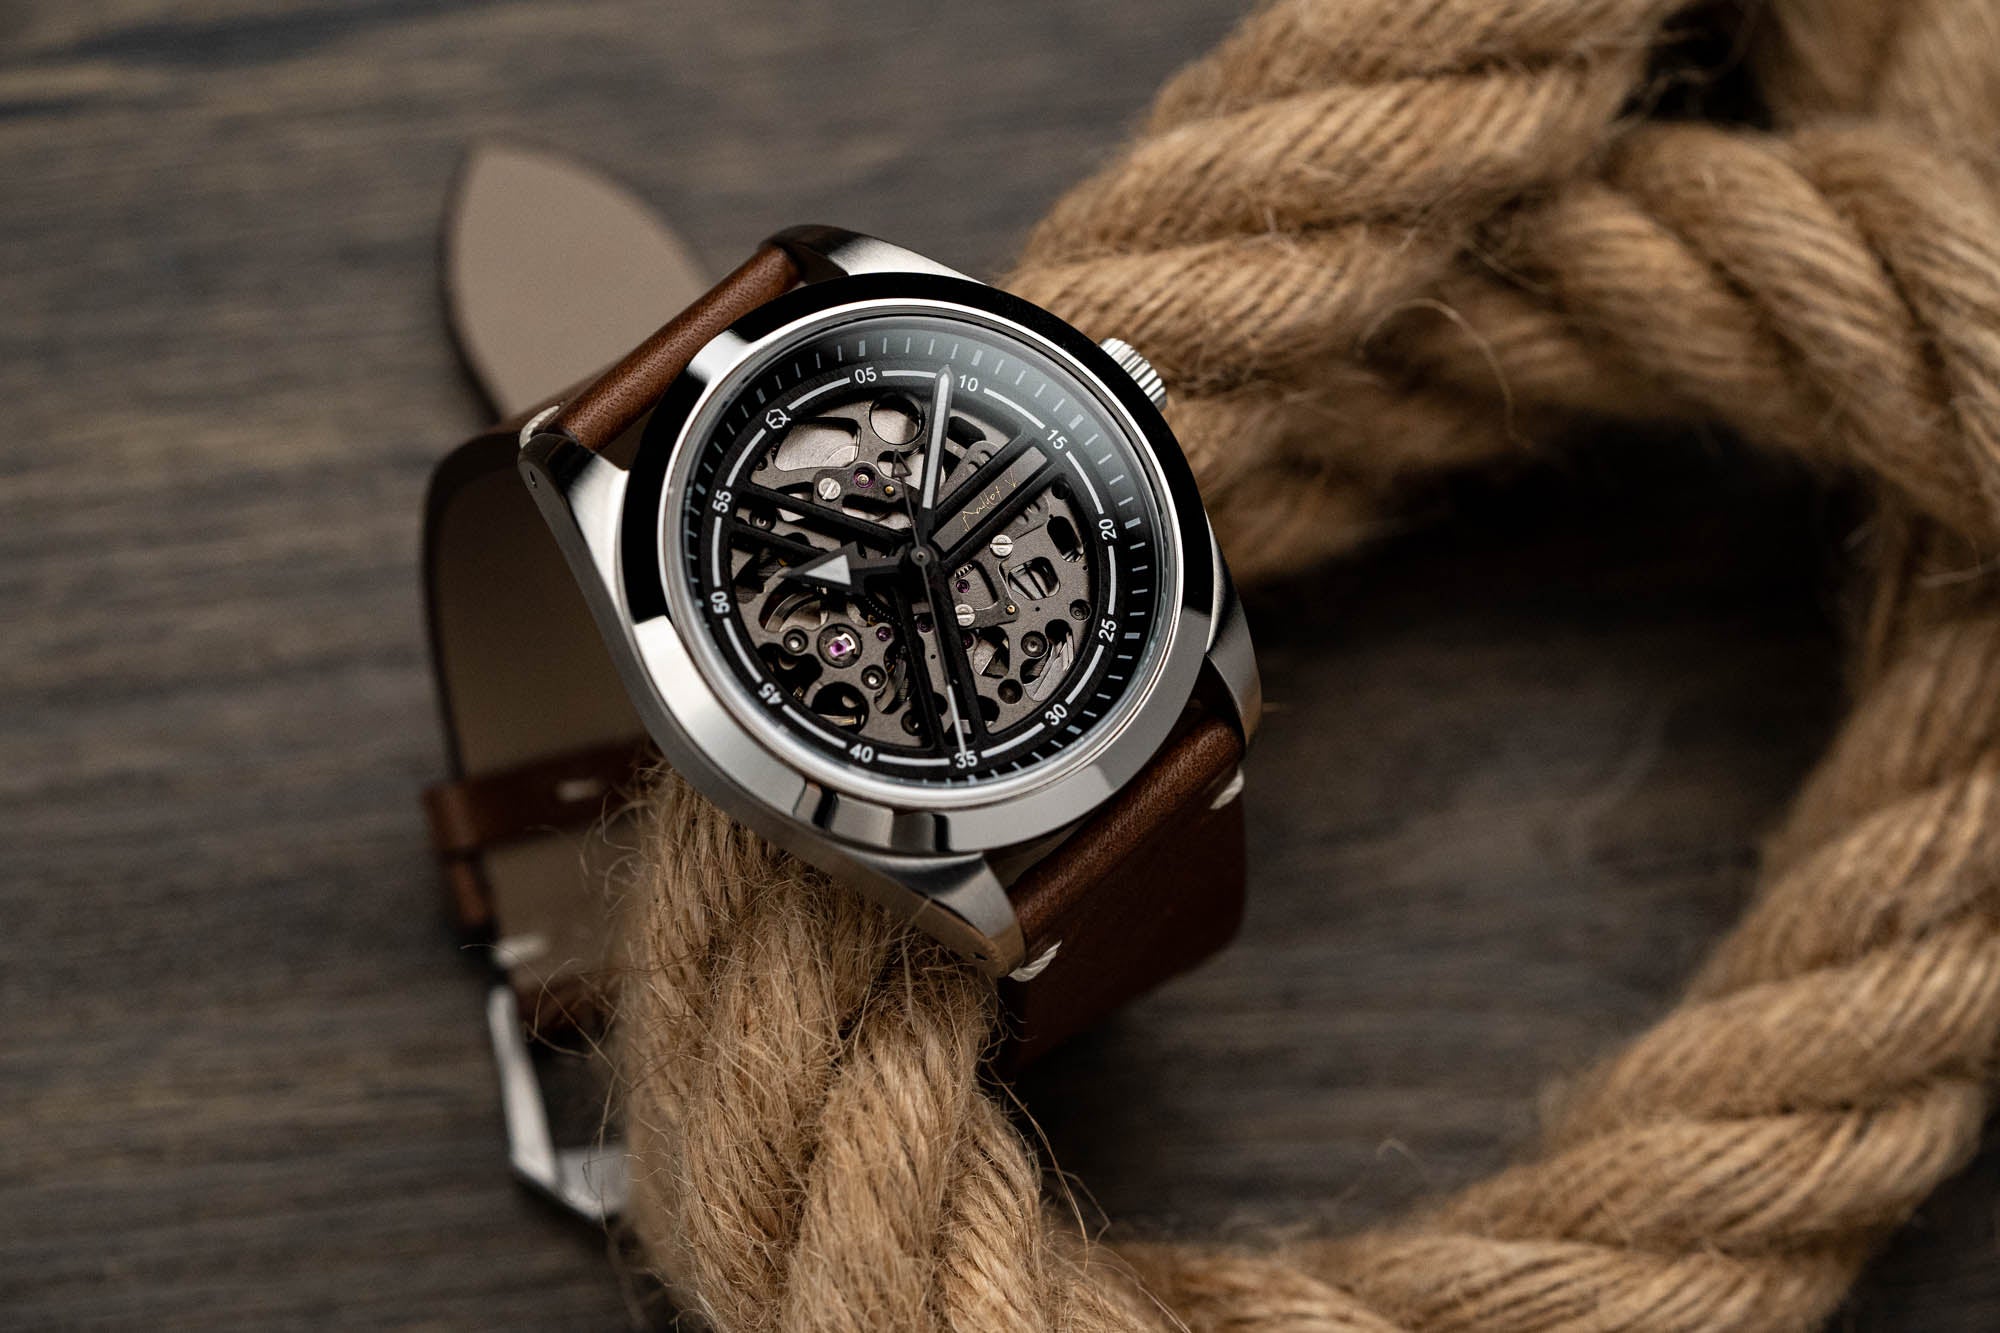 Skeleton "explorer" style sports watch. Custom made. Paired with vintage calf leather strap